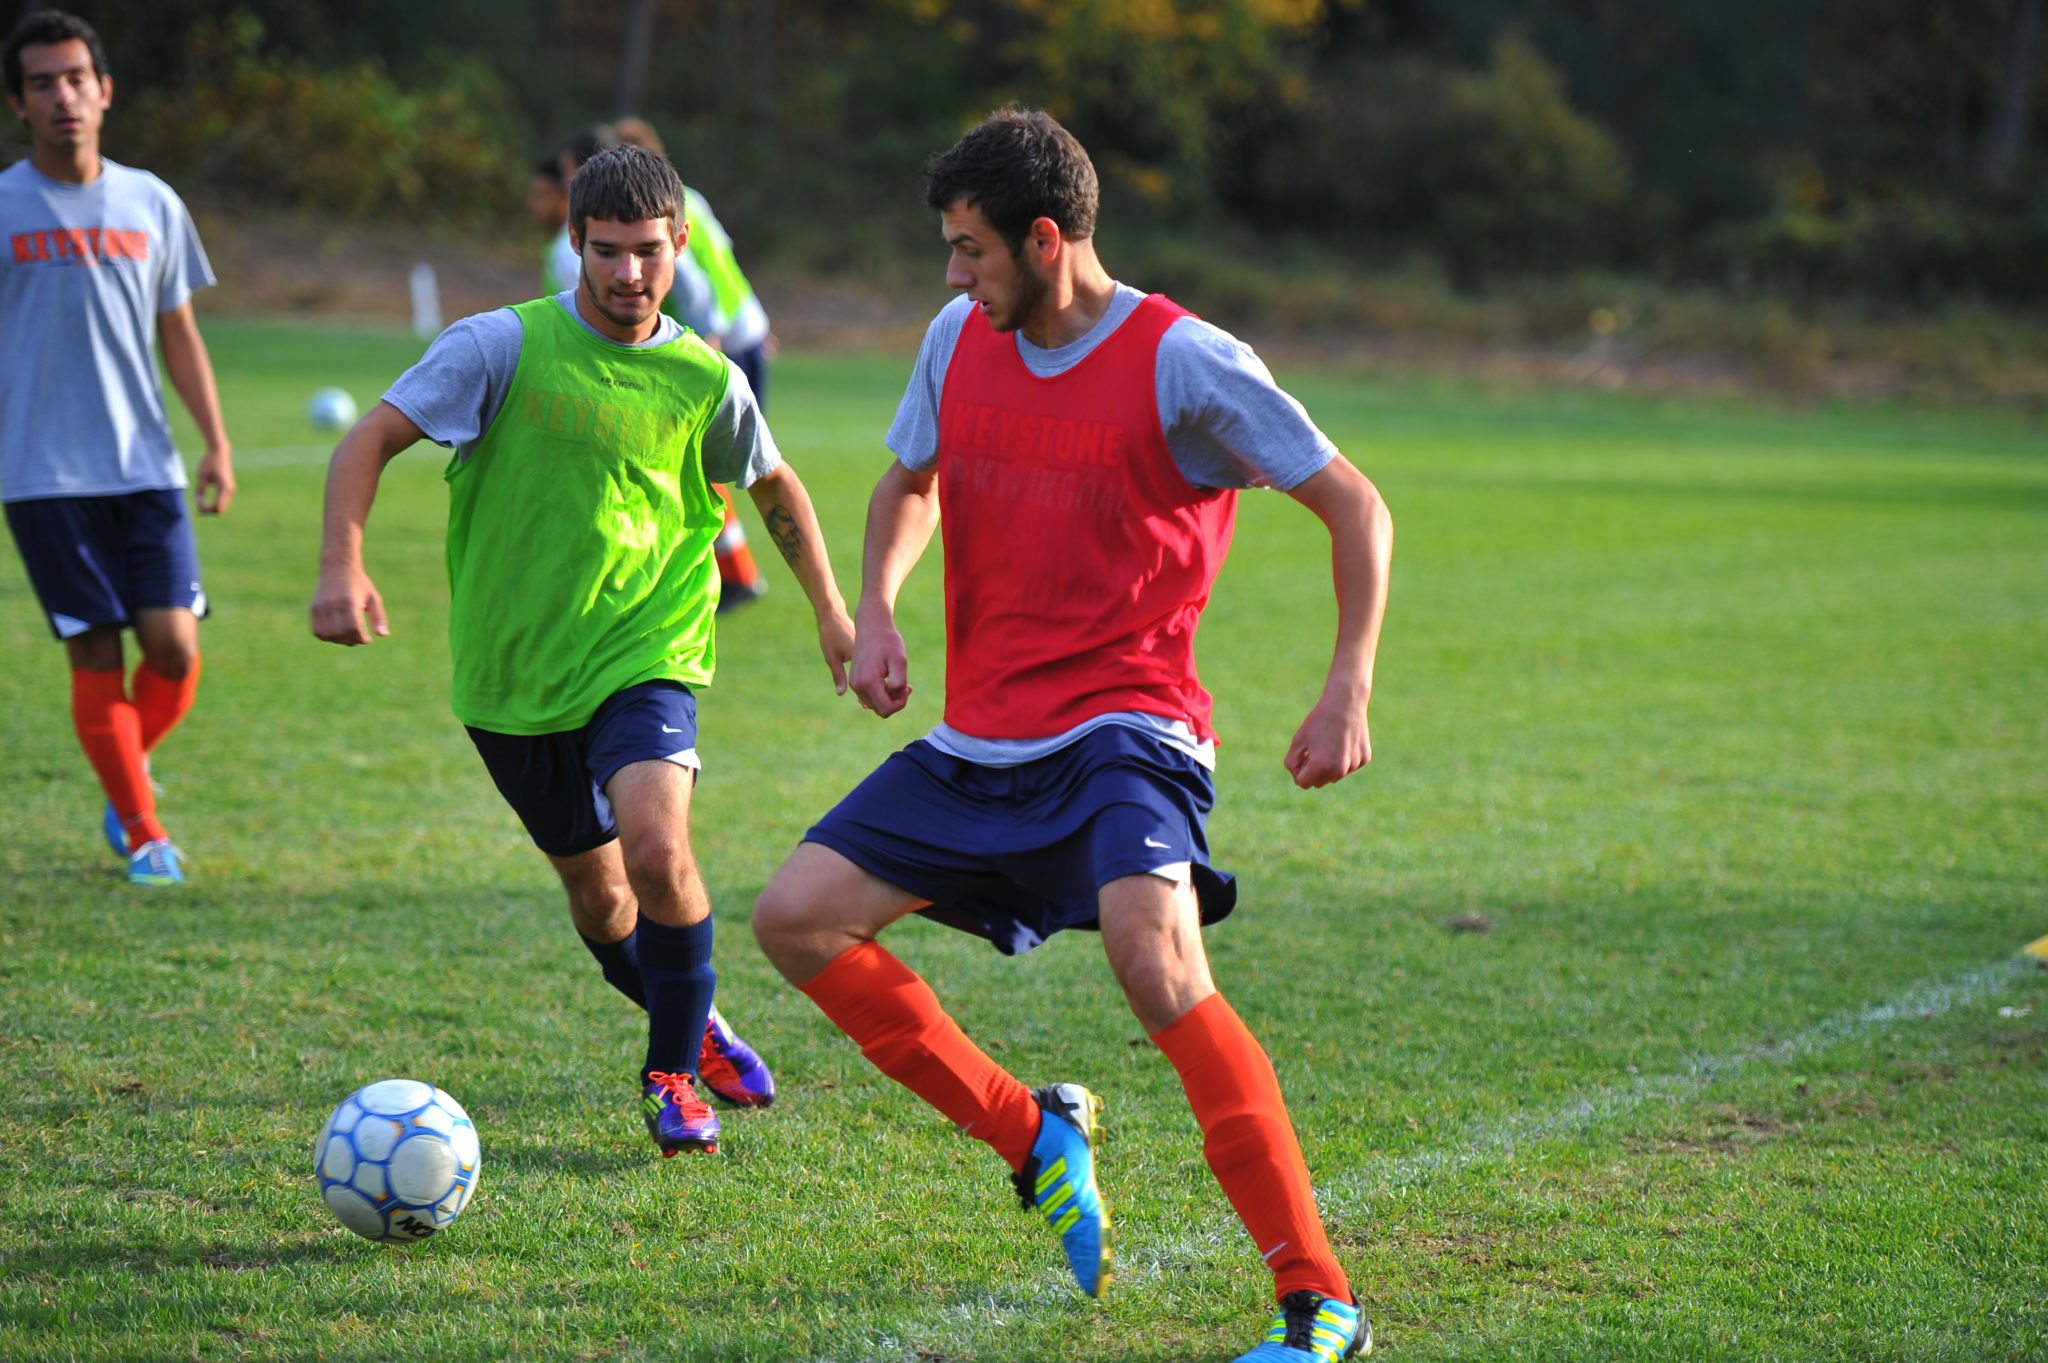 Male athletes play intramural soccer